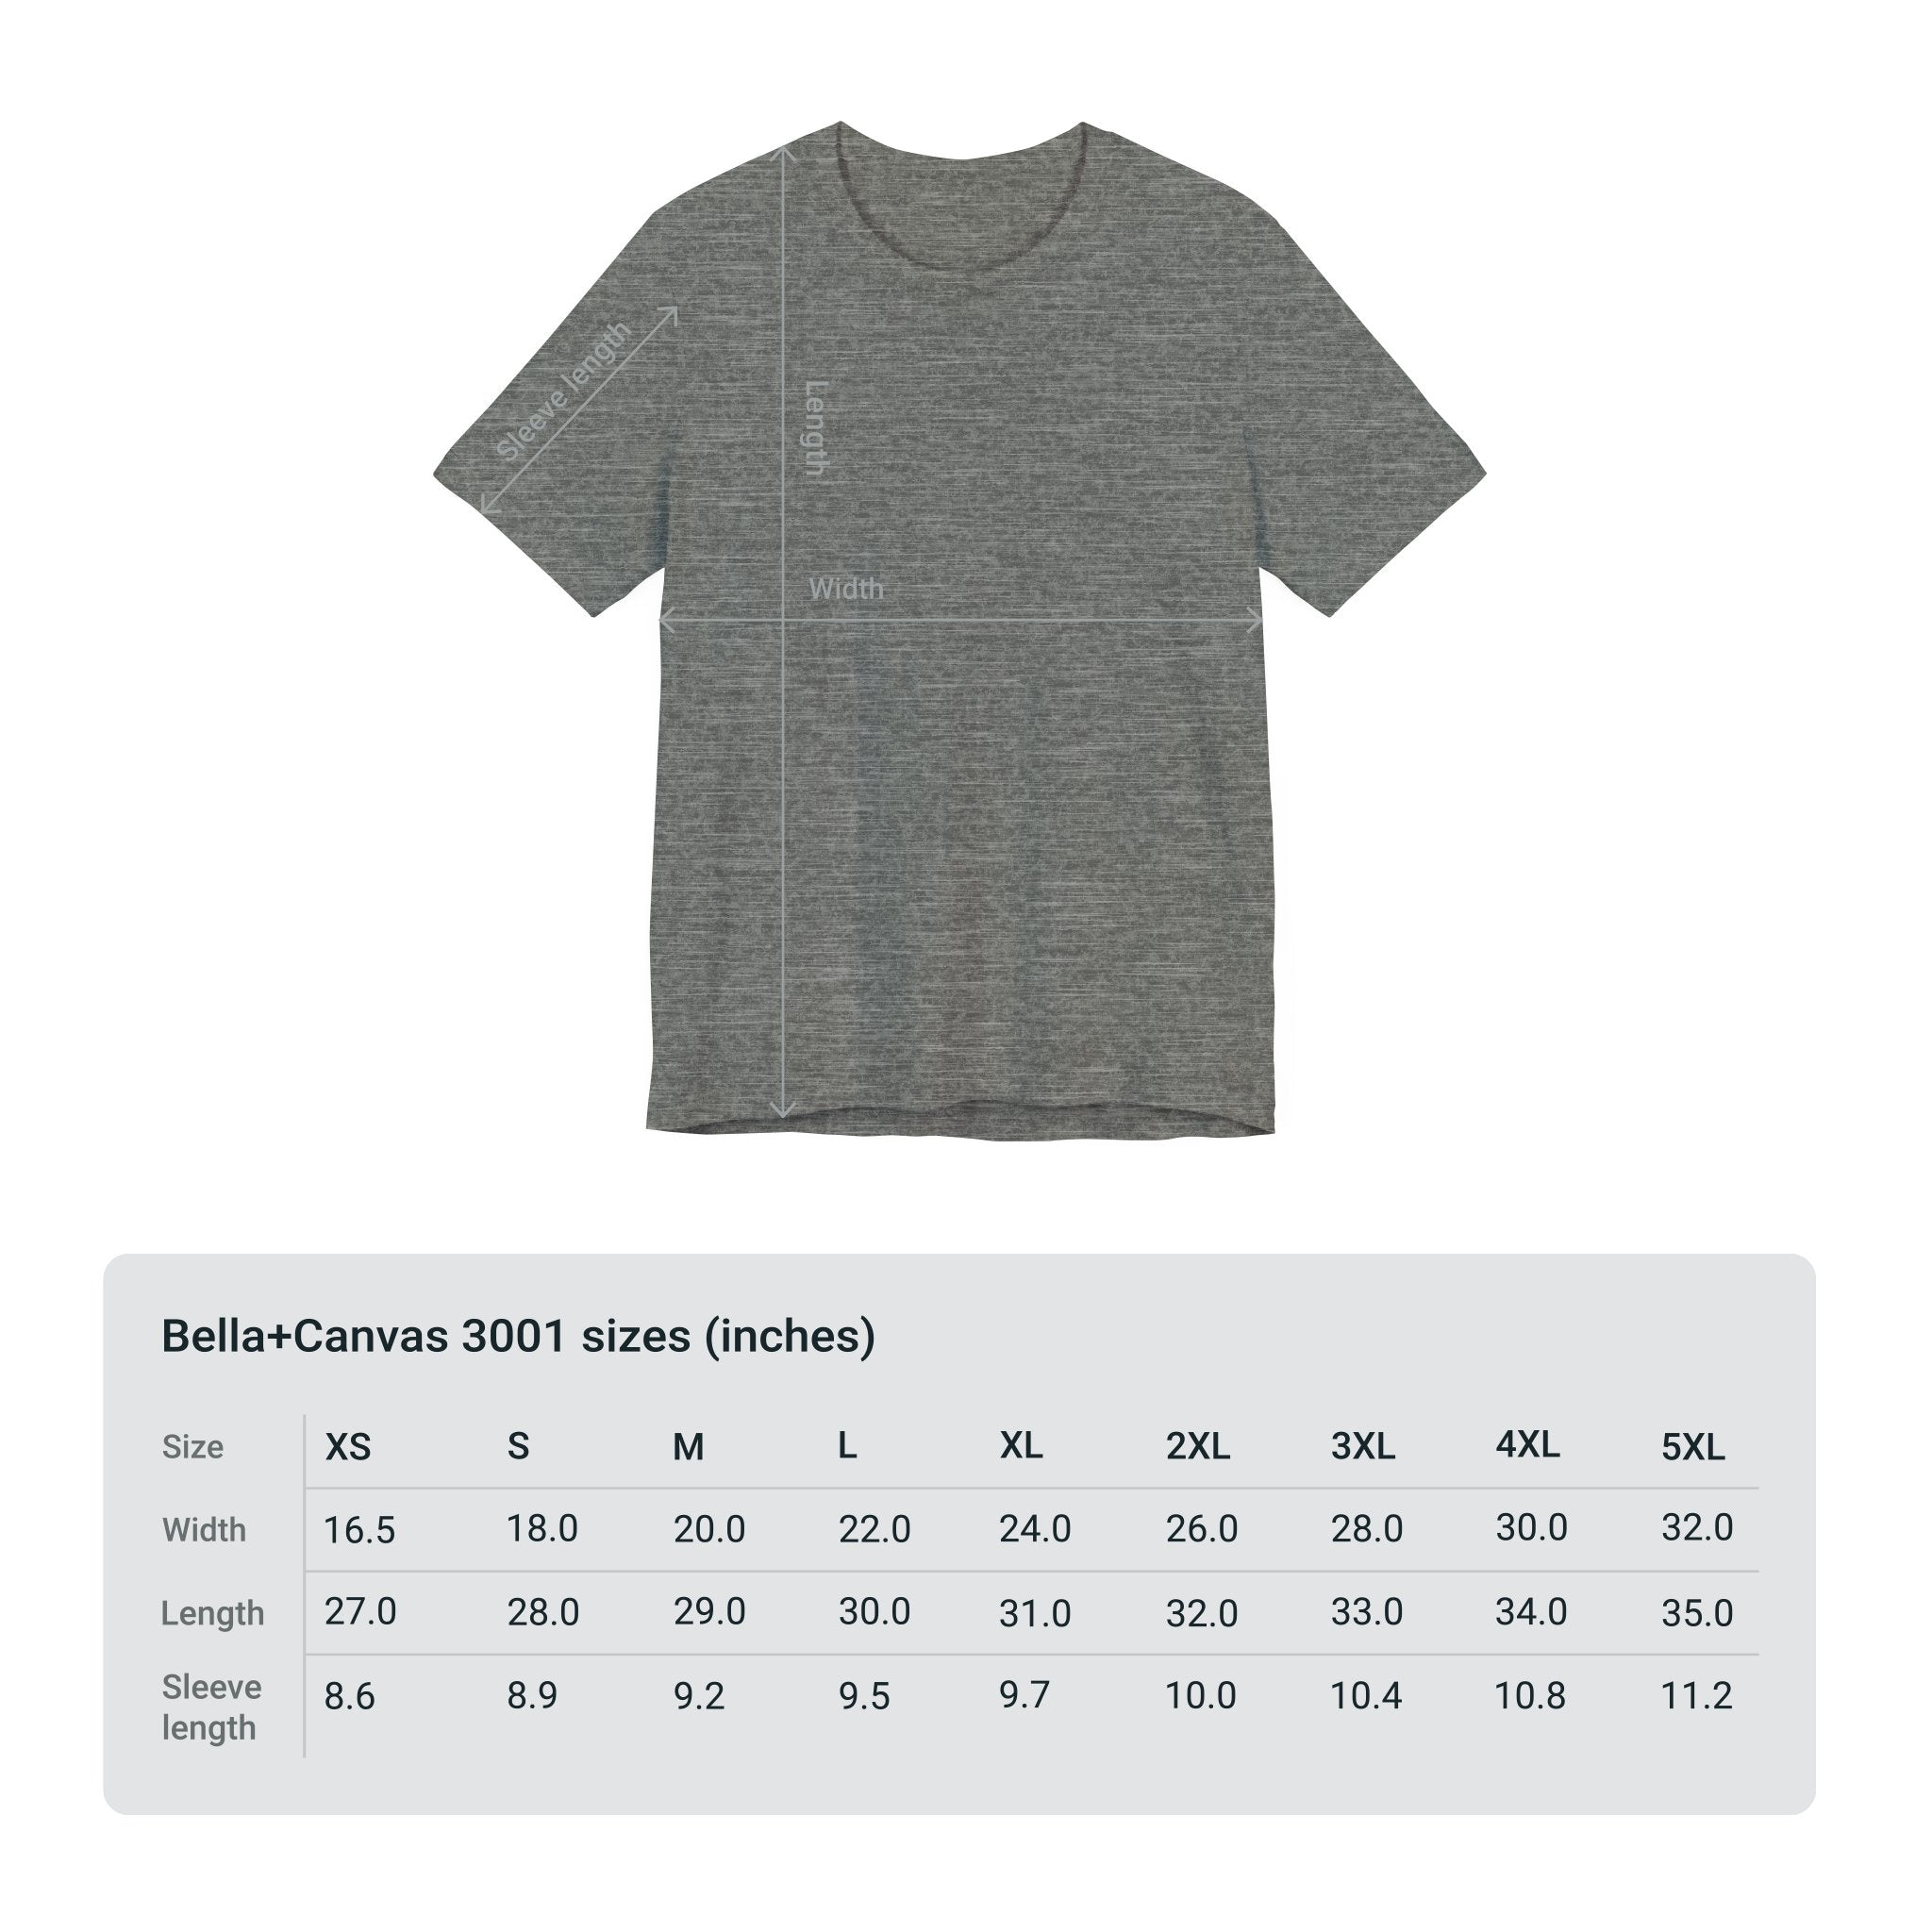 Adventure Unlimited unisex grey t-shirt with white logo, direct-to-garment printed